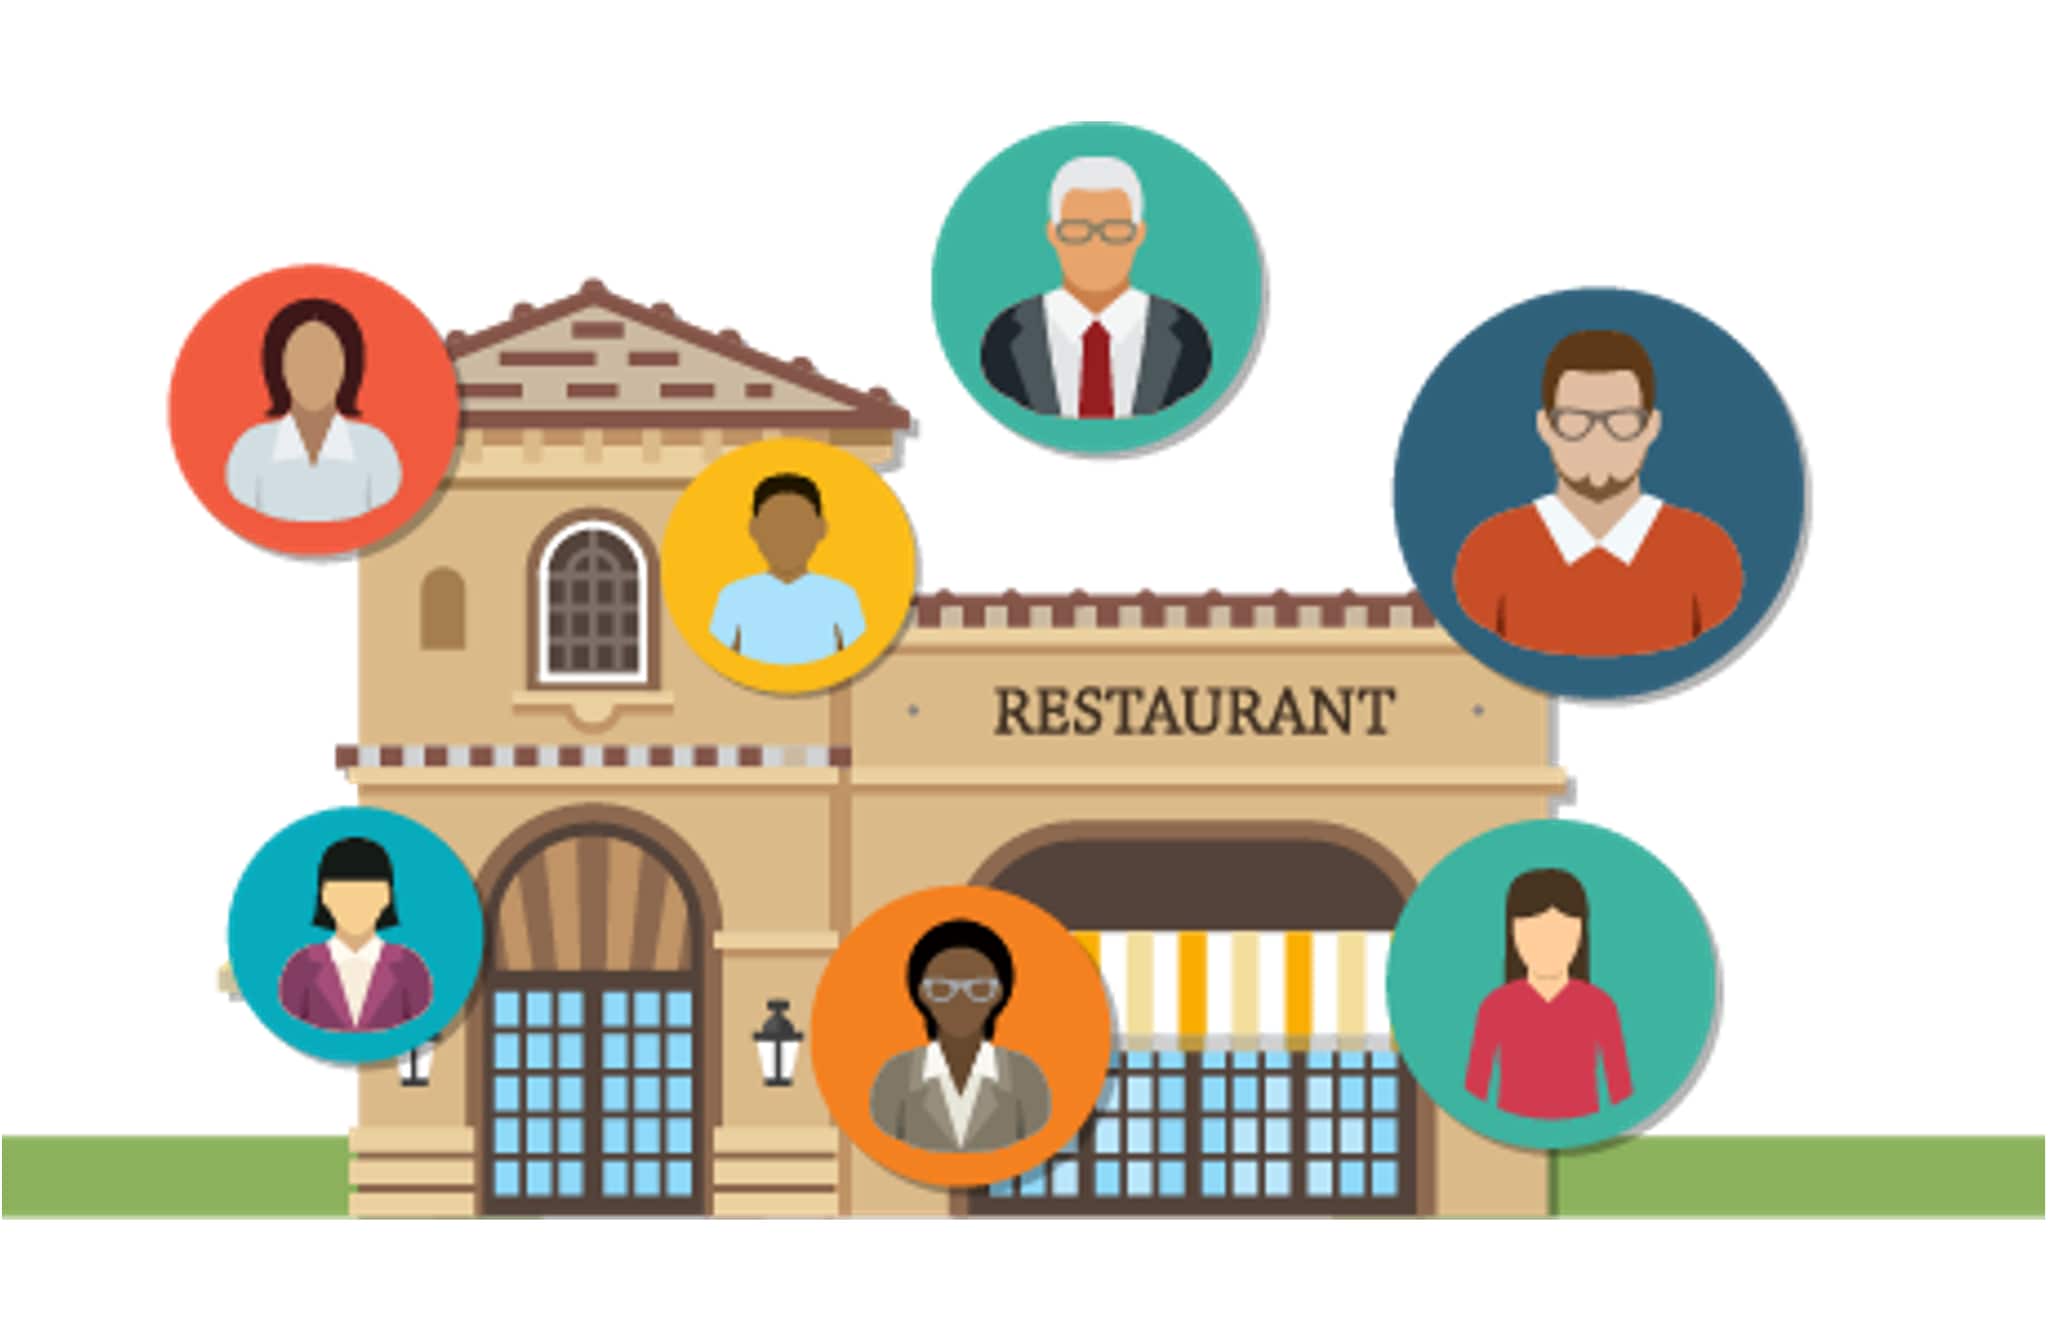 Illustration of a restaurant with people around it